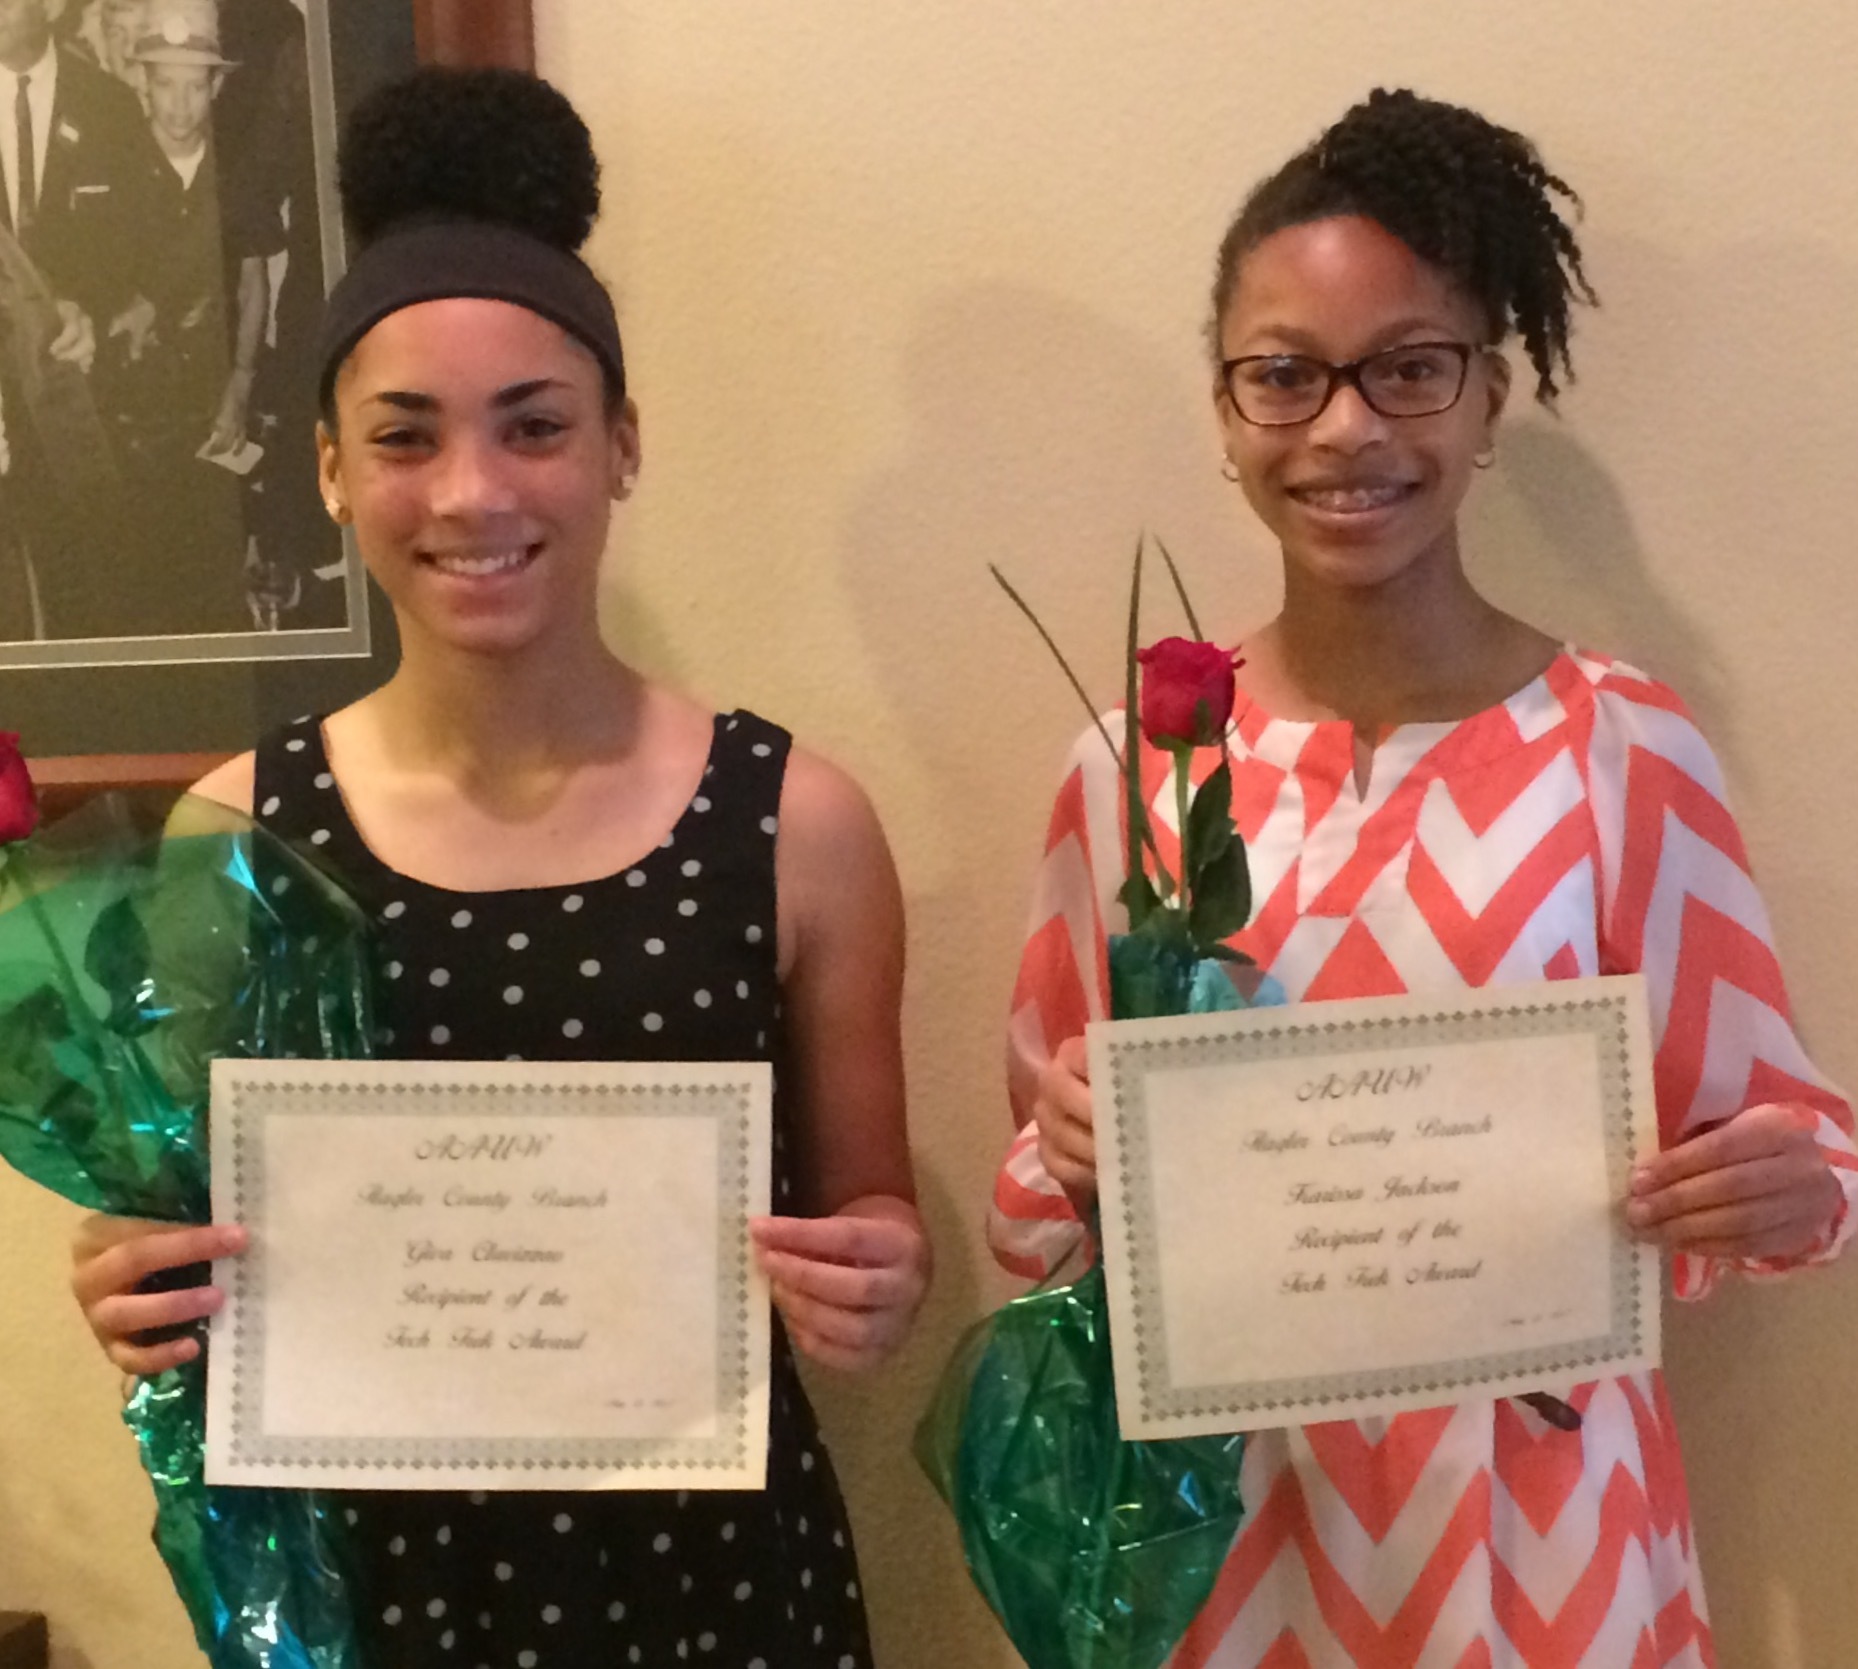 Giva Clavizzao and Karissa Jackson, who are the middle school students selected to attend Tech Trek STEM Camp at Florida Atlantic University at Boca Raton, FL. Photo Courtesy AAUW.